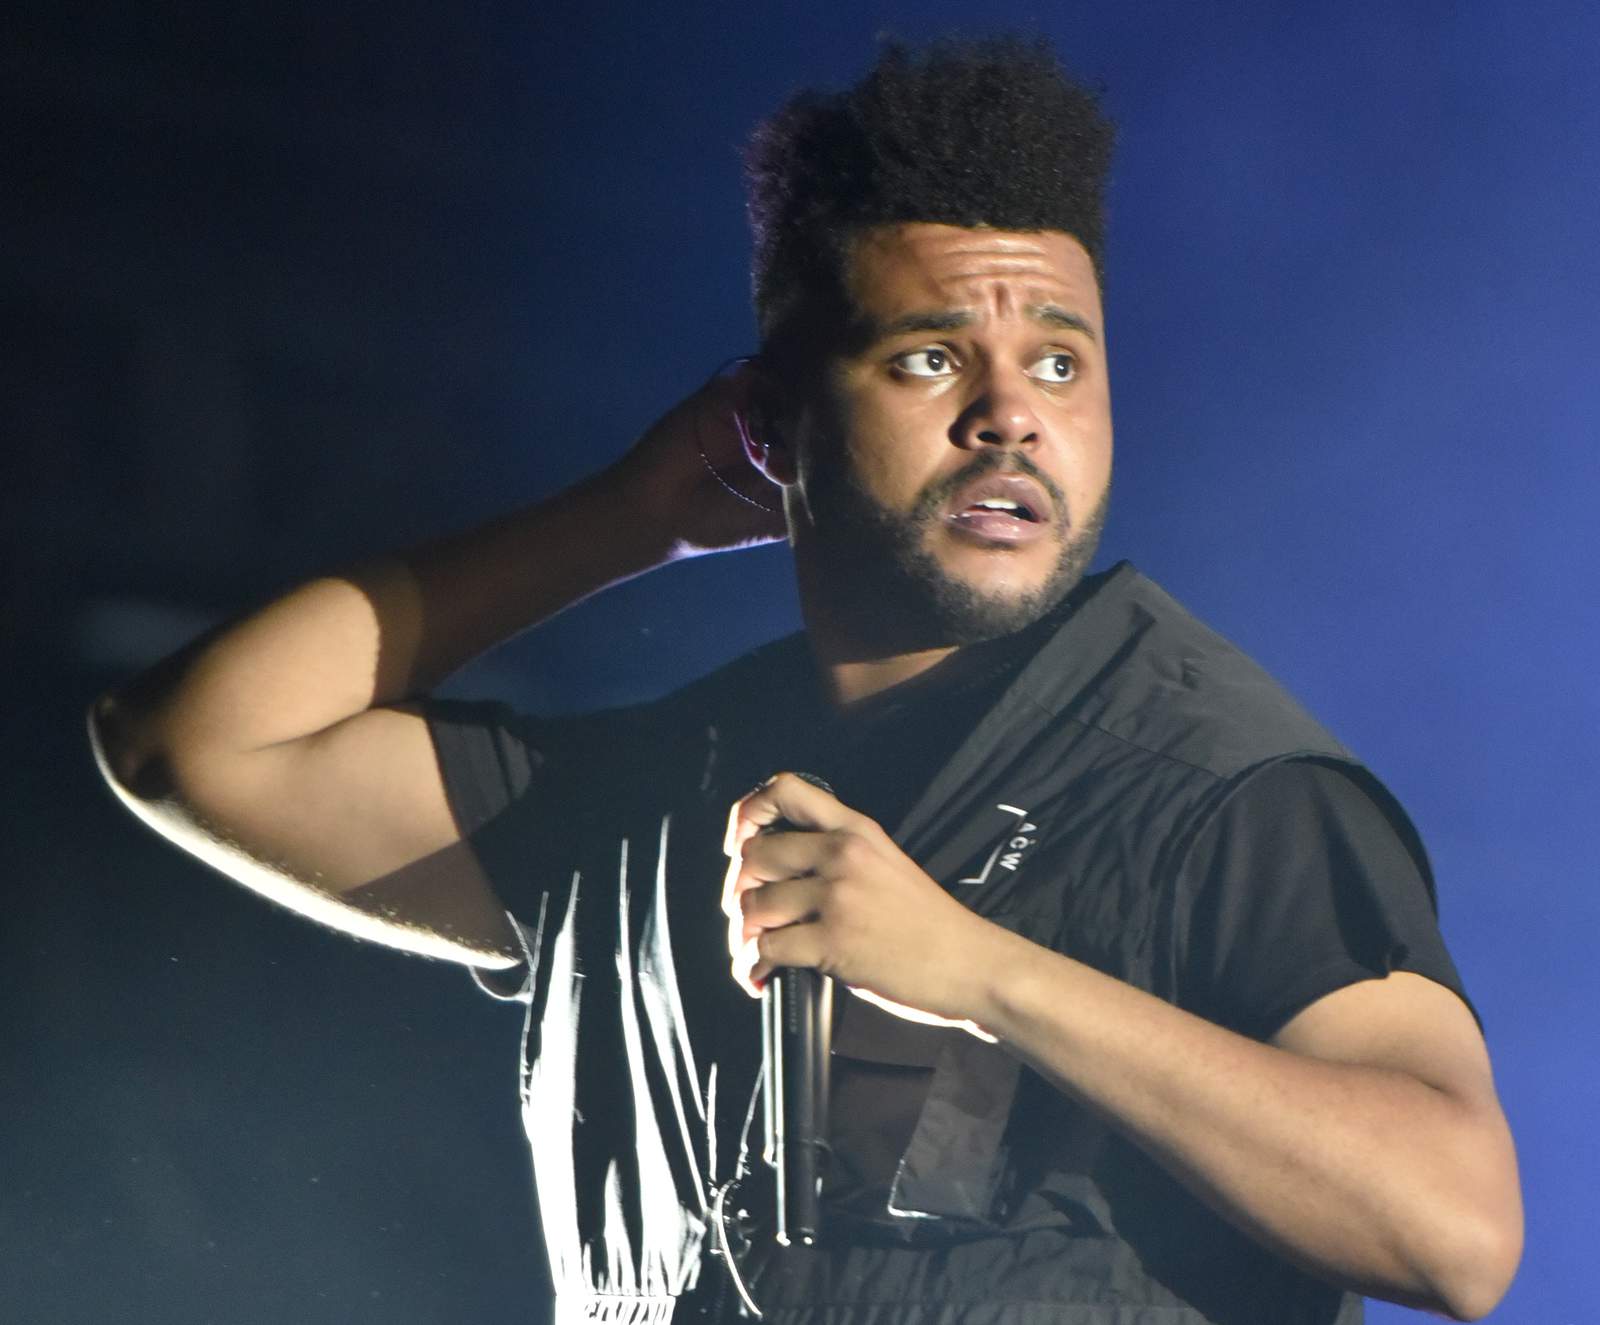 The Weeknd criticizes Grammys over nominations snub